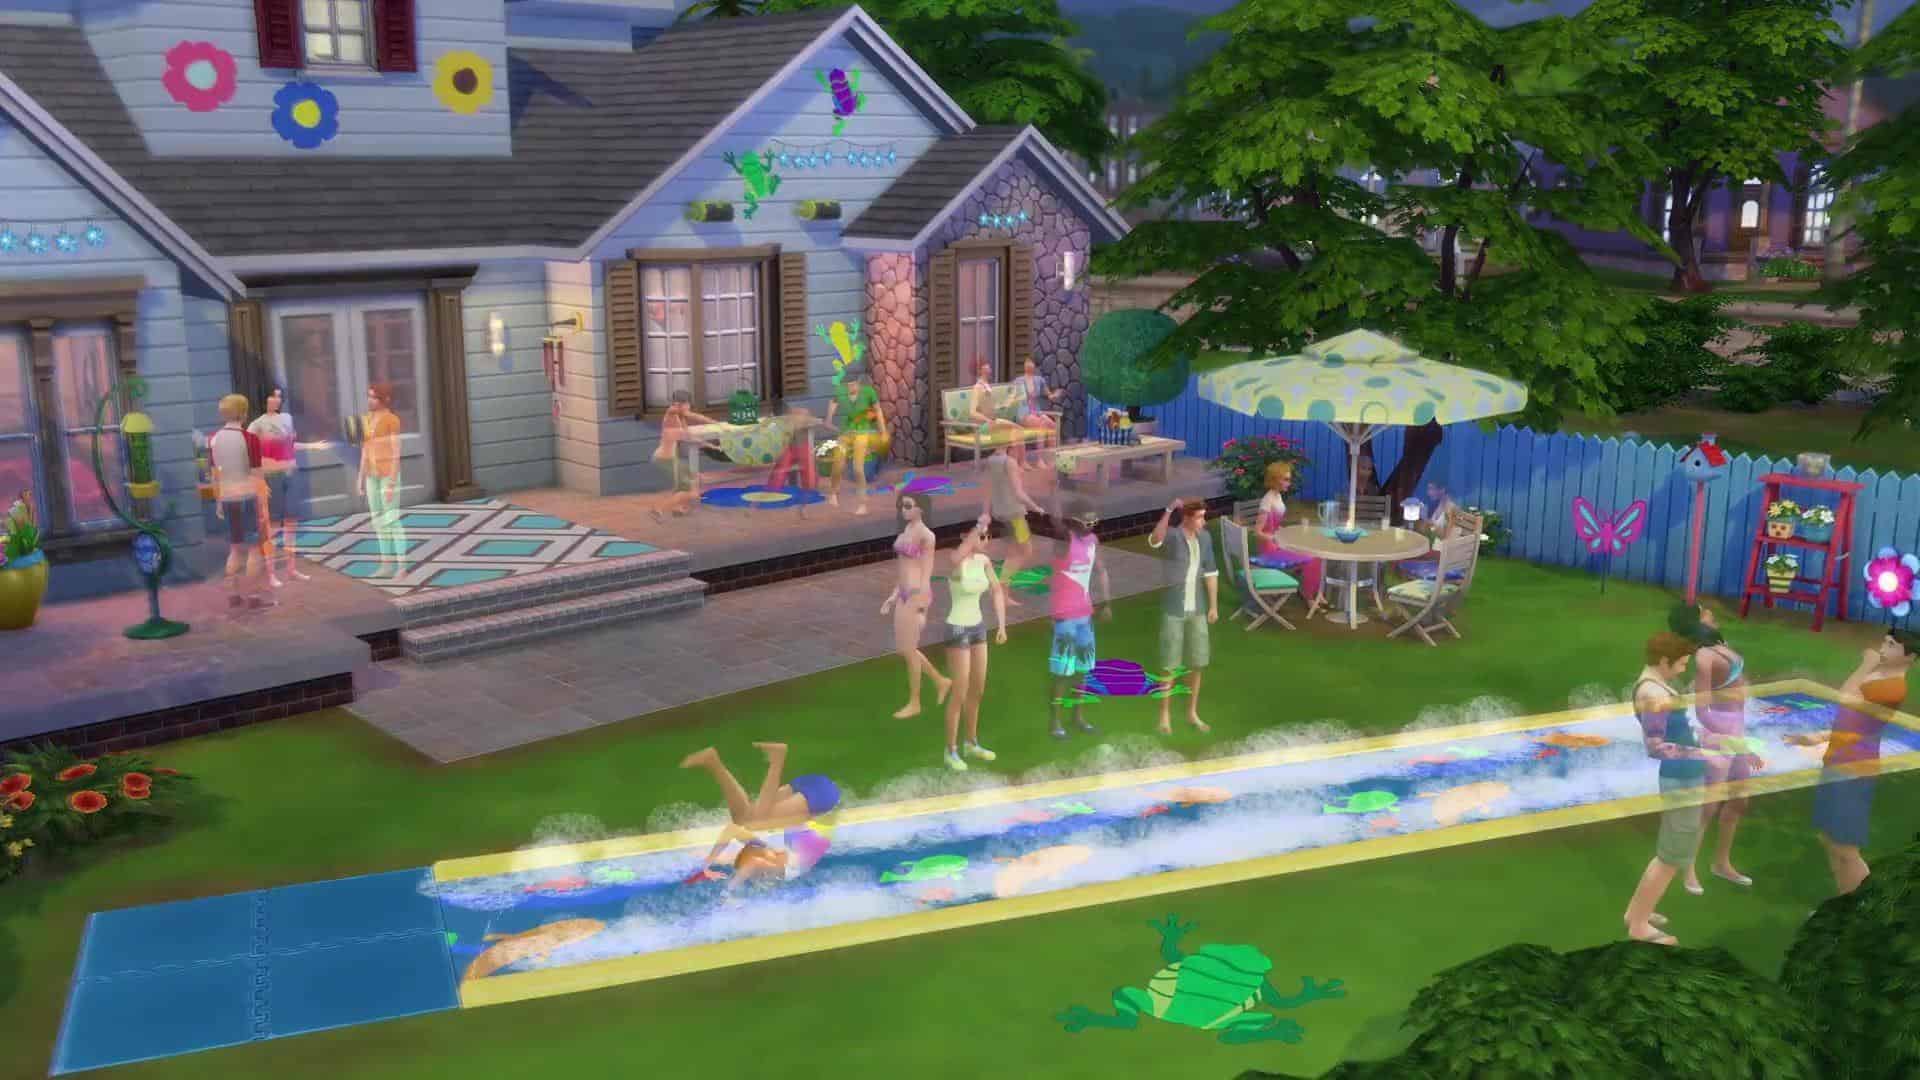 The Sims 4 Backyard Stuff Download game - Free Download full game pc ...